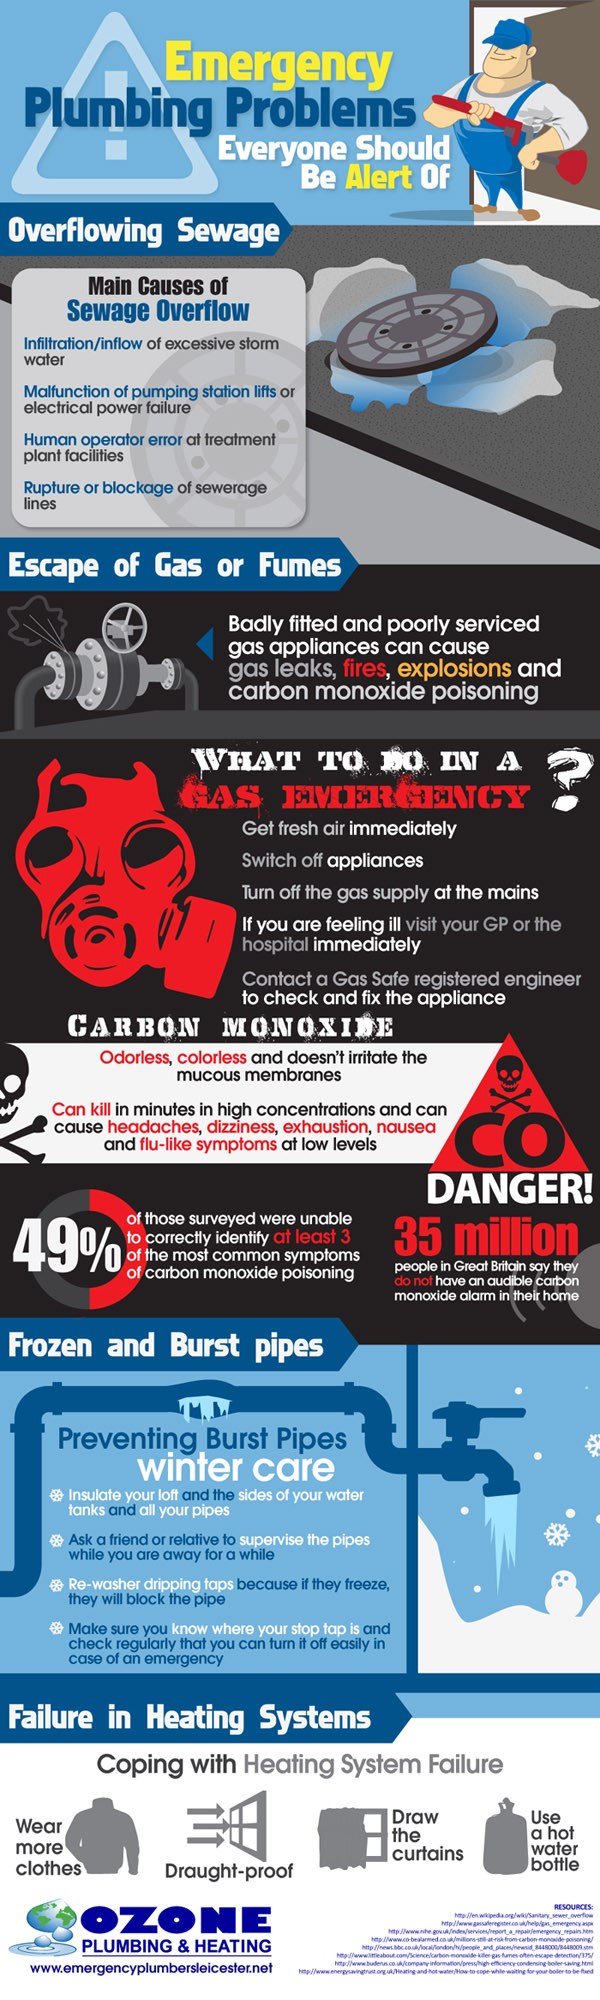 Emergency Plumbing Problems You Should Be Aware Of Infographic